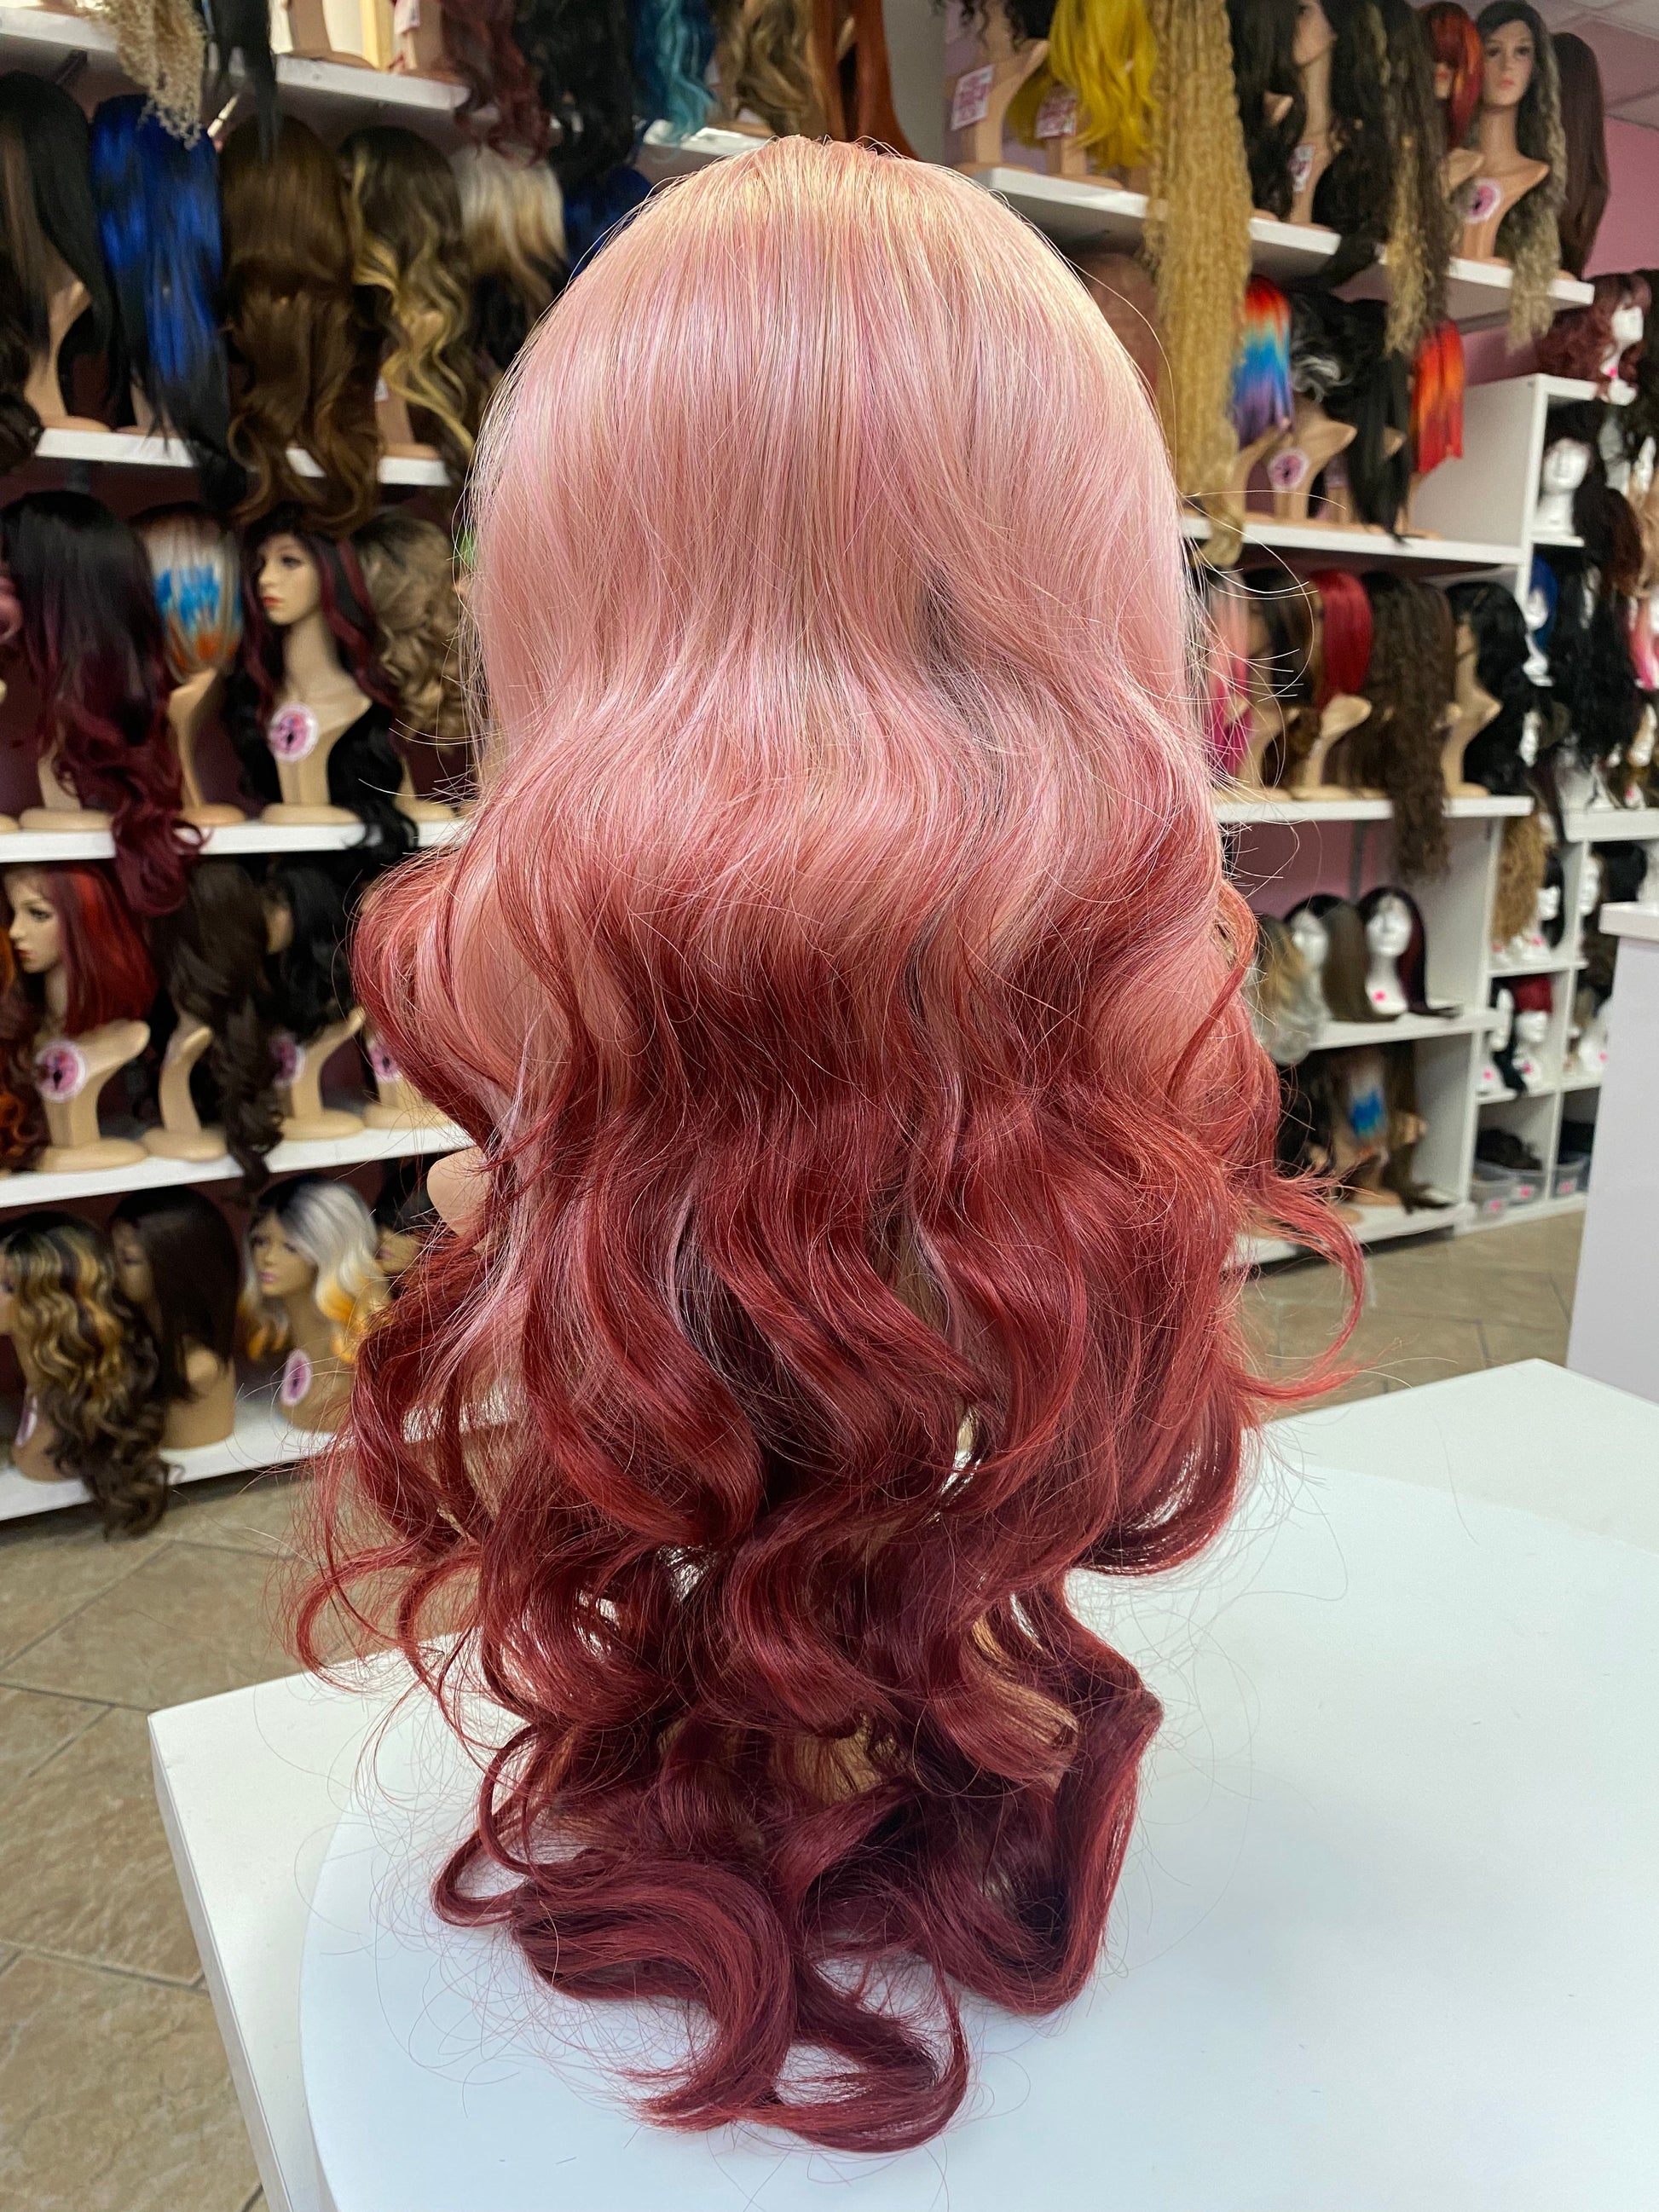 46 Tess - 13x4 Free Part Wig - PINK TO RED - DaizyKat Cosmetics 46 Tess - 13x4 Free Part Wig - PINK TO RED DaizyKat Cosmetics Wigs